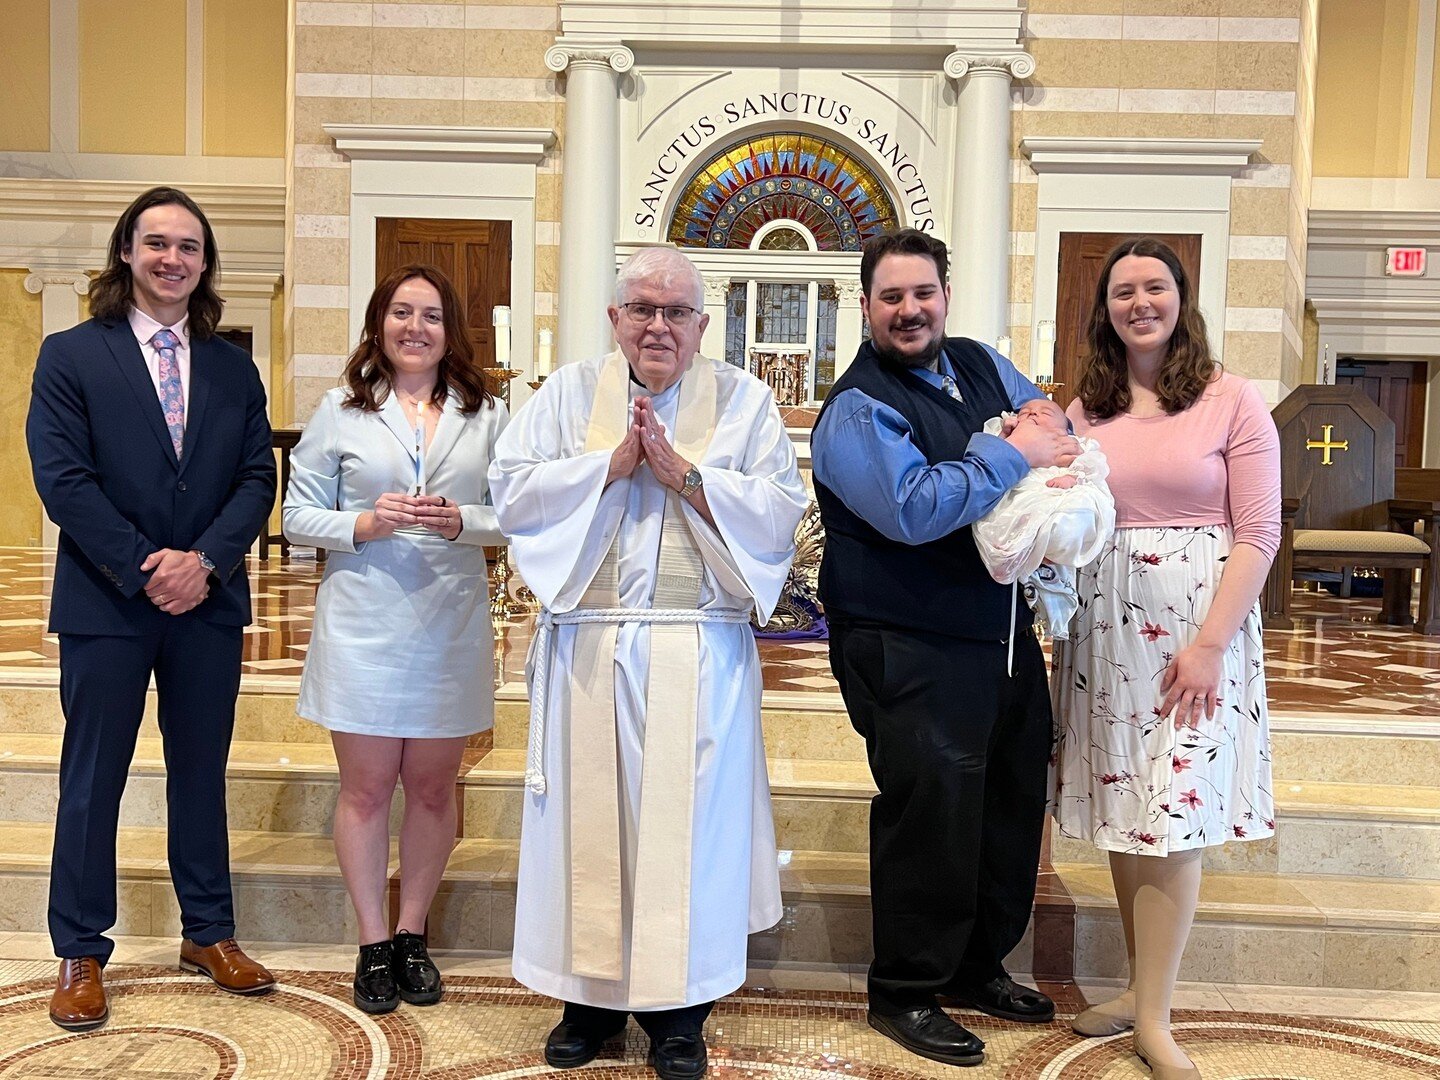 Congratulations to the Viola family on their recent baptism!